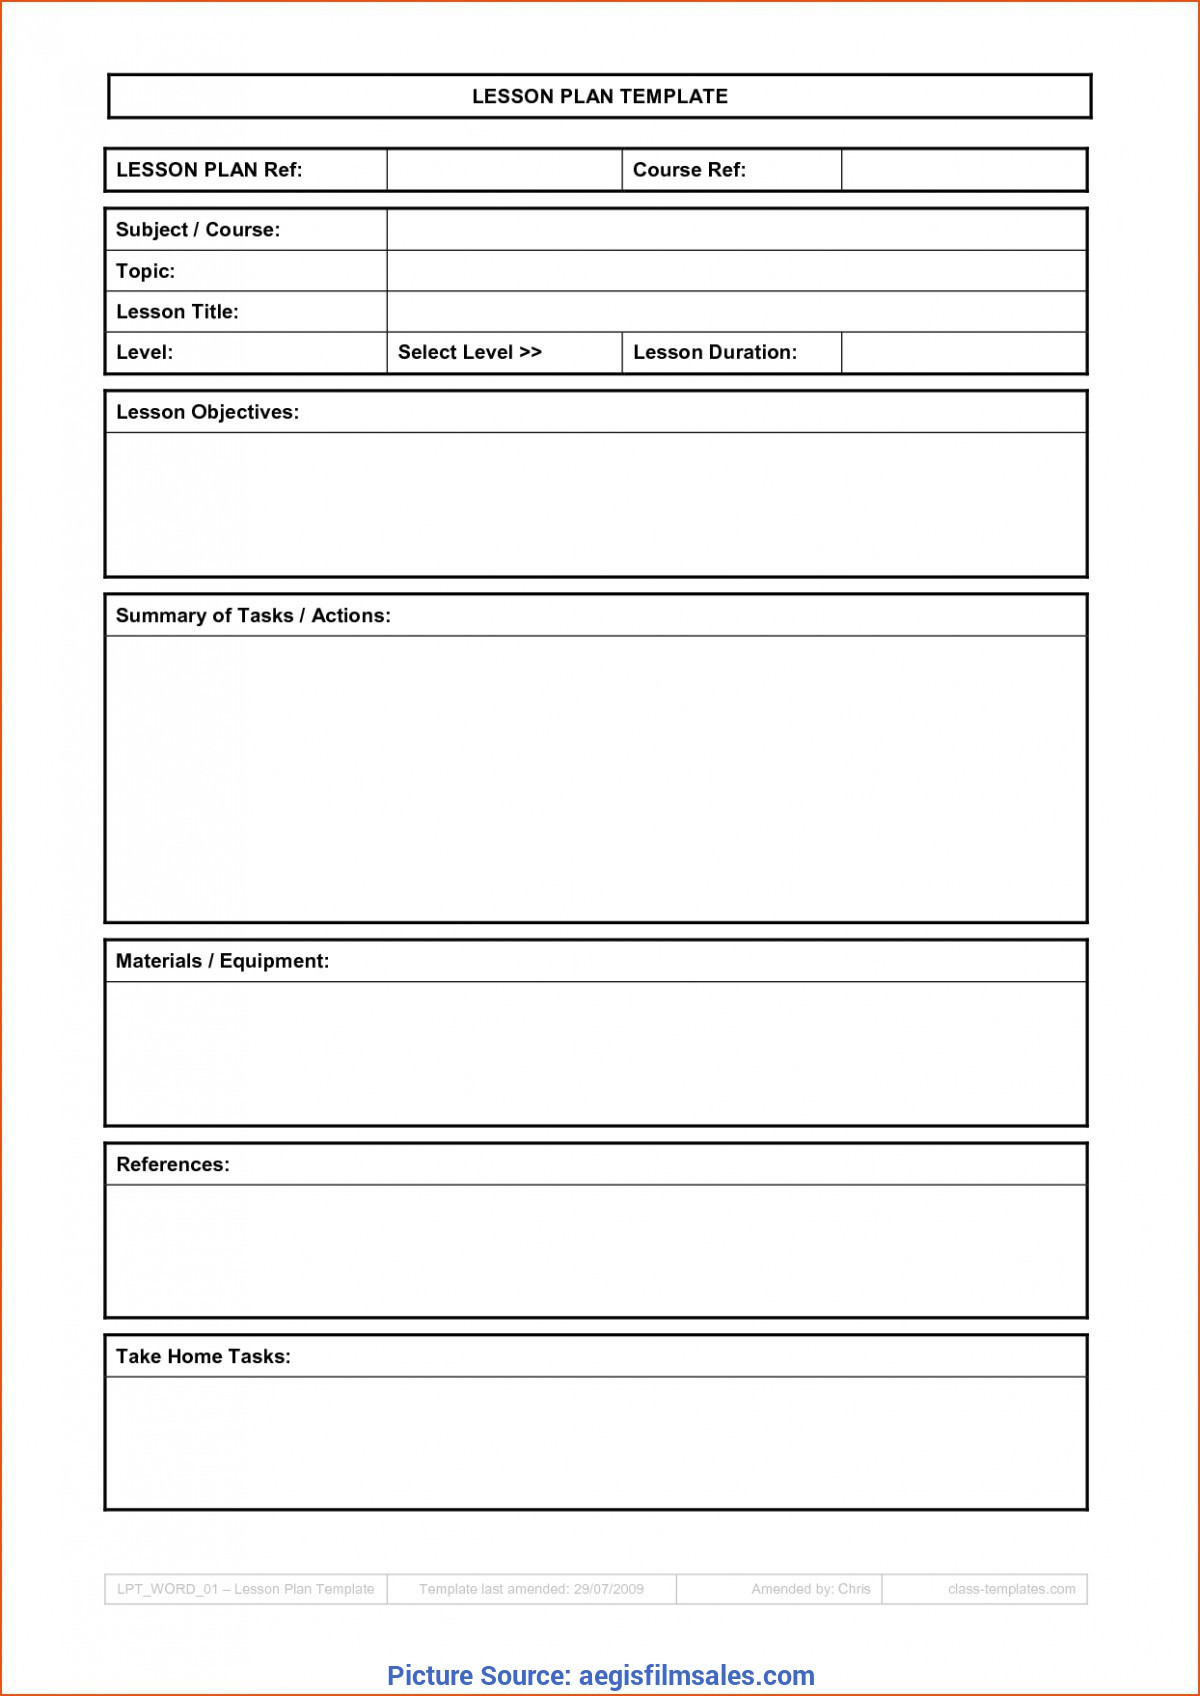 Blank Lesson Plan Template Ota Tech Find Lesson Template Ideas for Your Activity